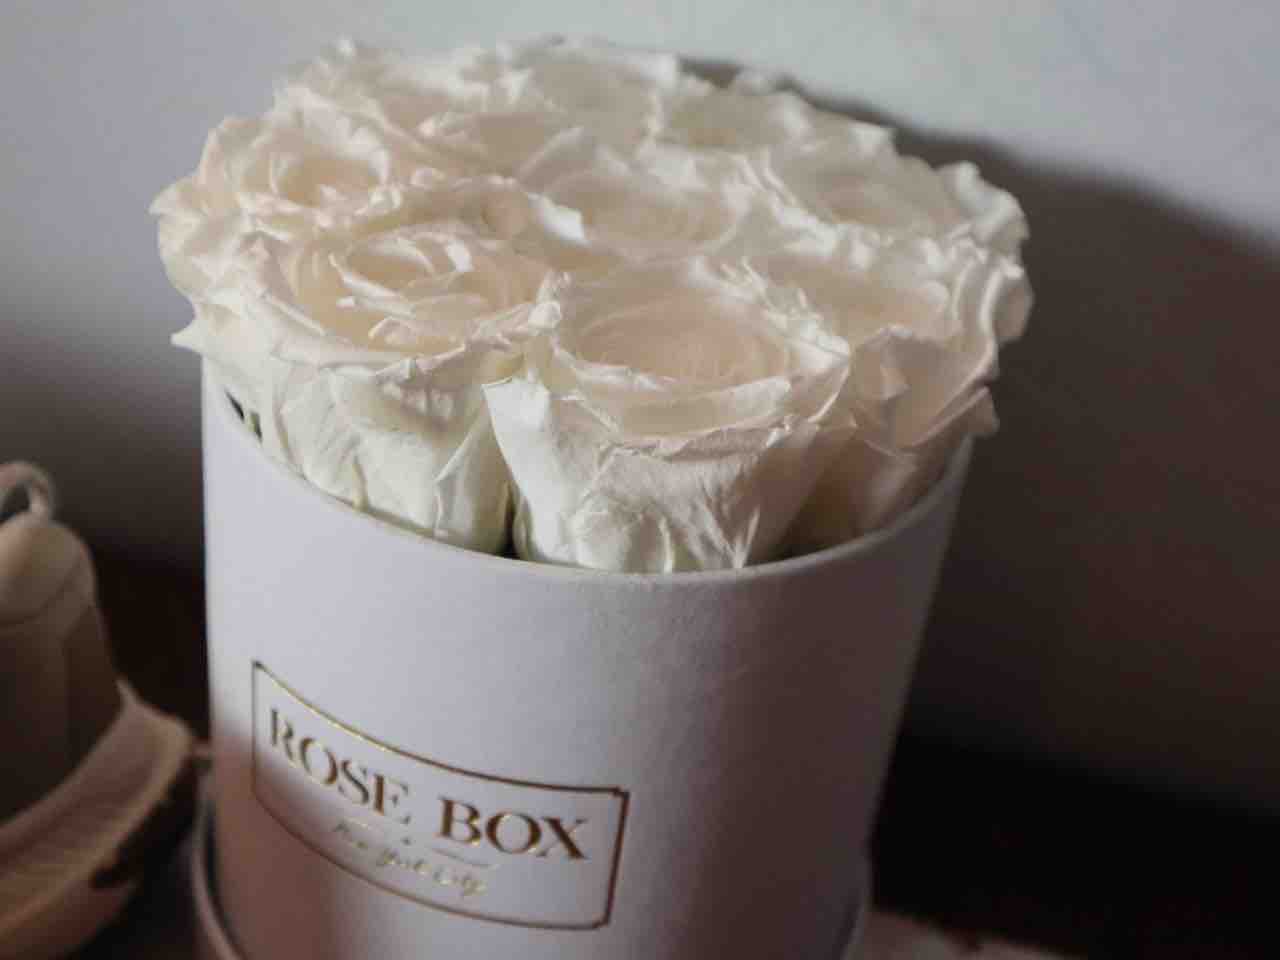 Rose Box Is One Of The Best Mother’s Day Gift For New Moms